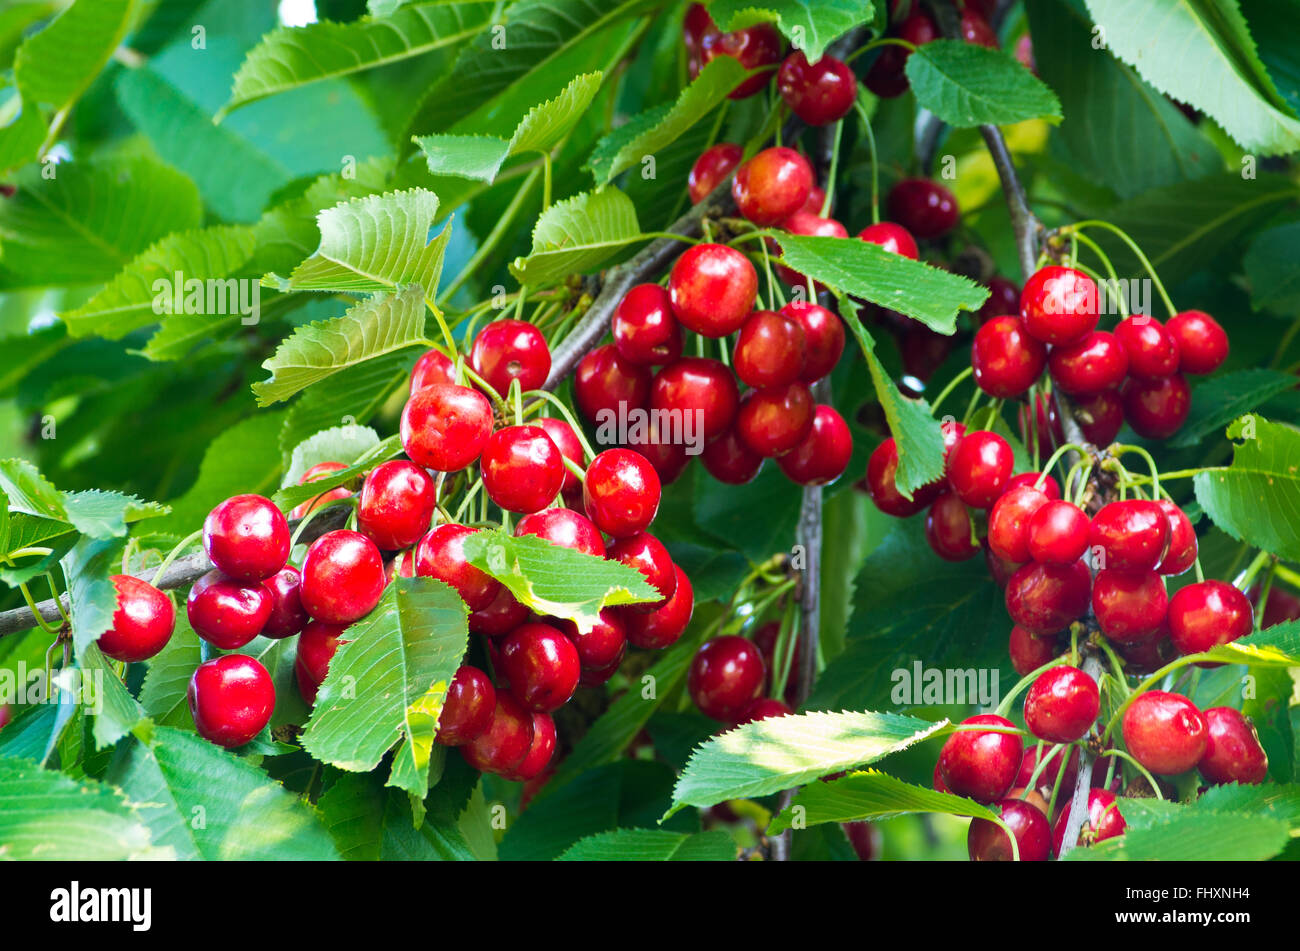 Cherry branch with ripe fruit and leaves. Stock Photo